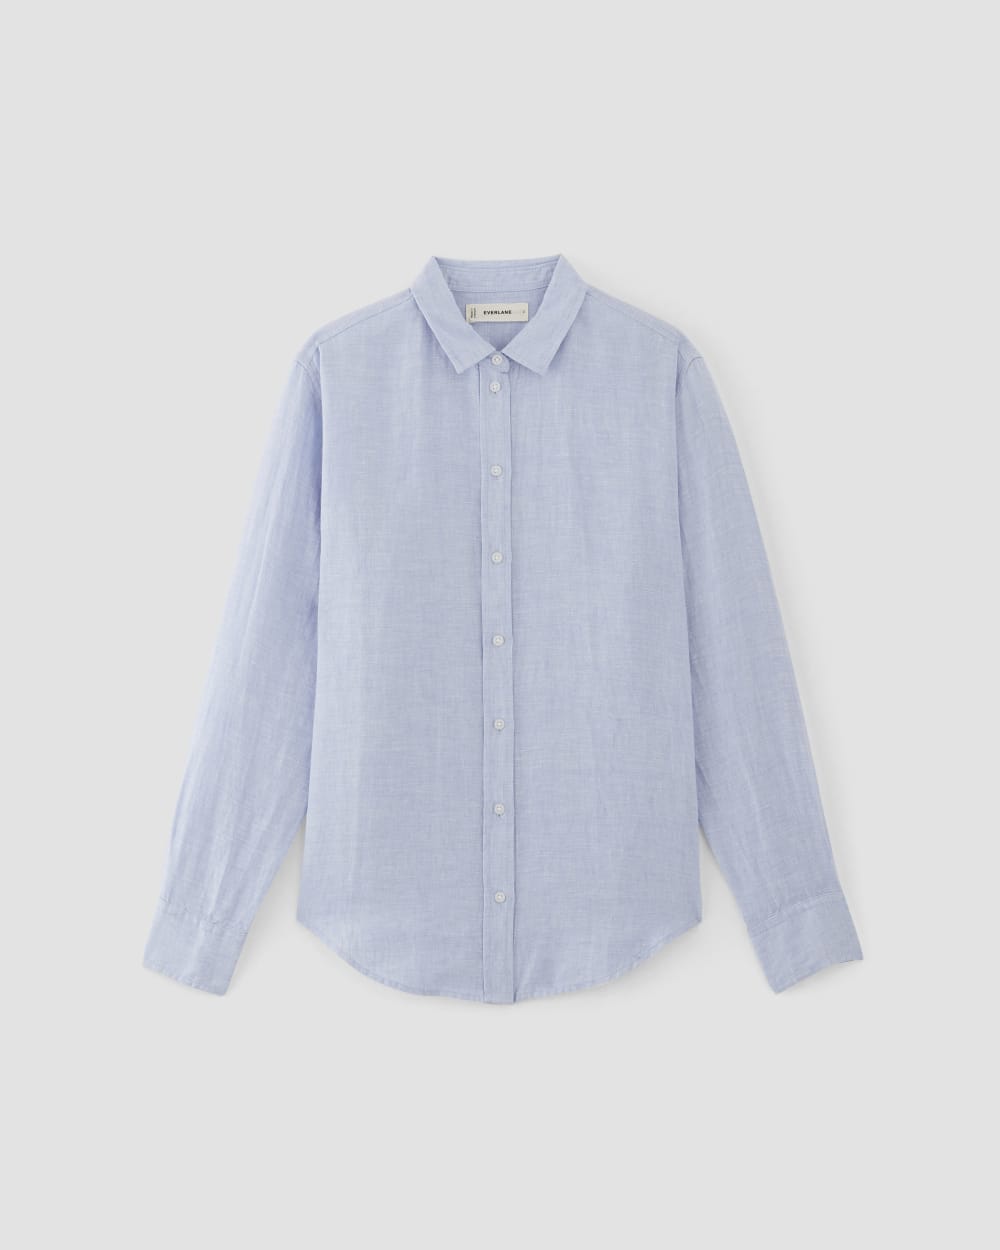 Everlane Just Launched a Collection of Lightweight Linen Clothing